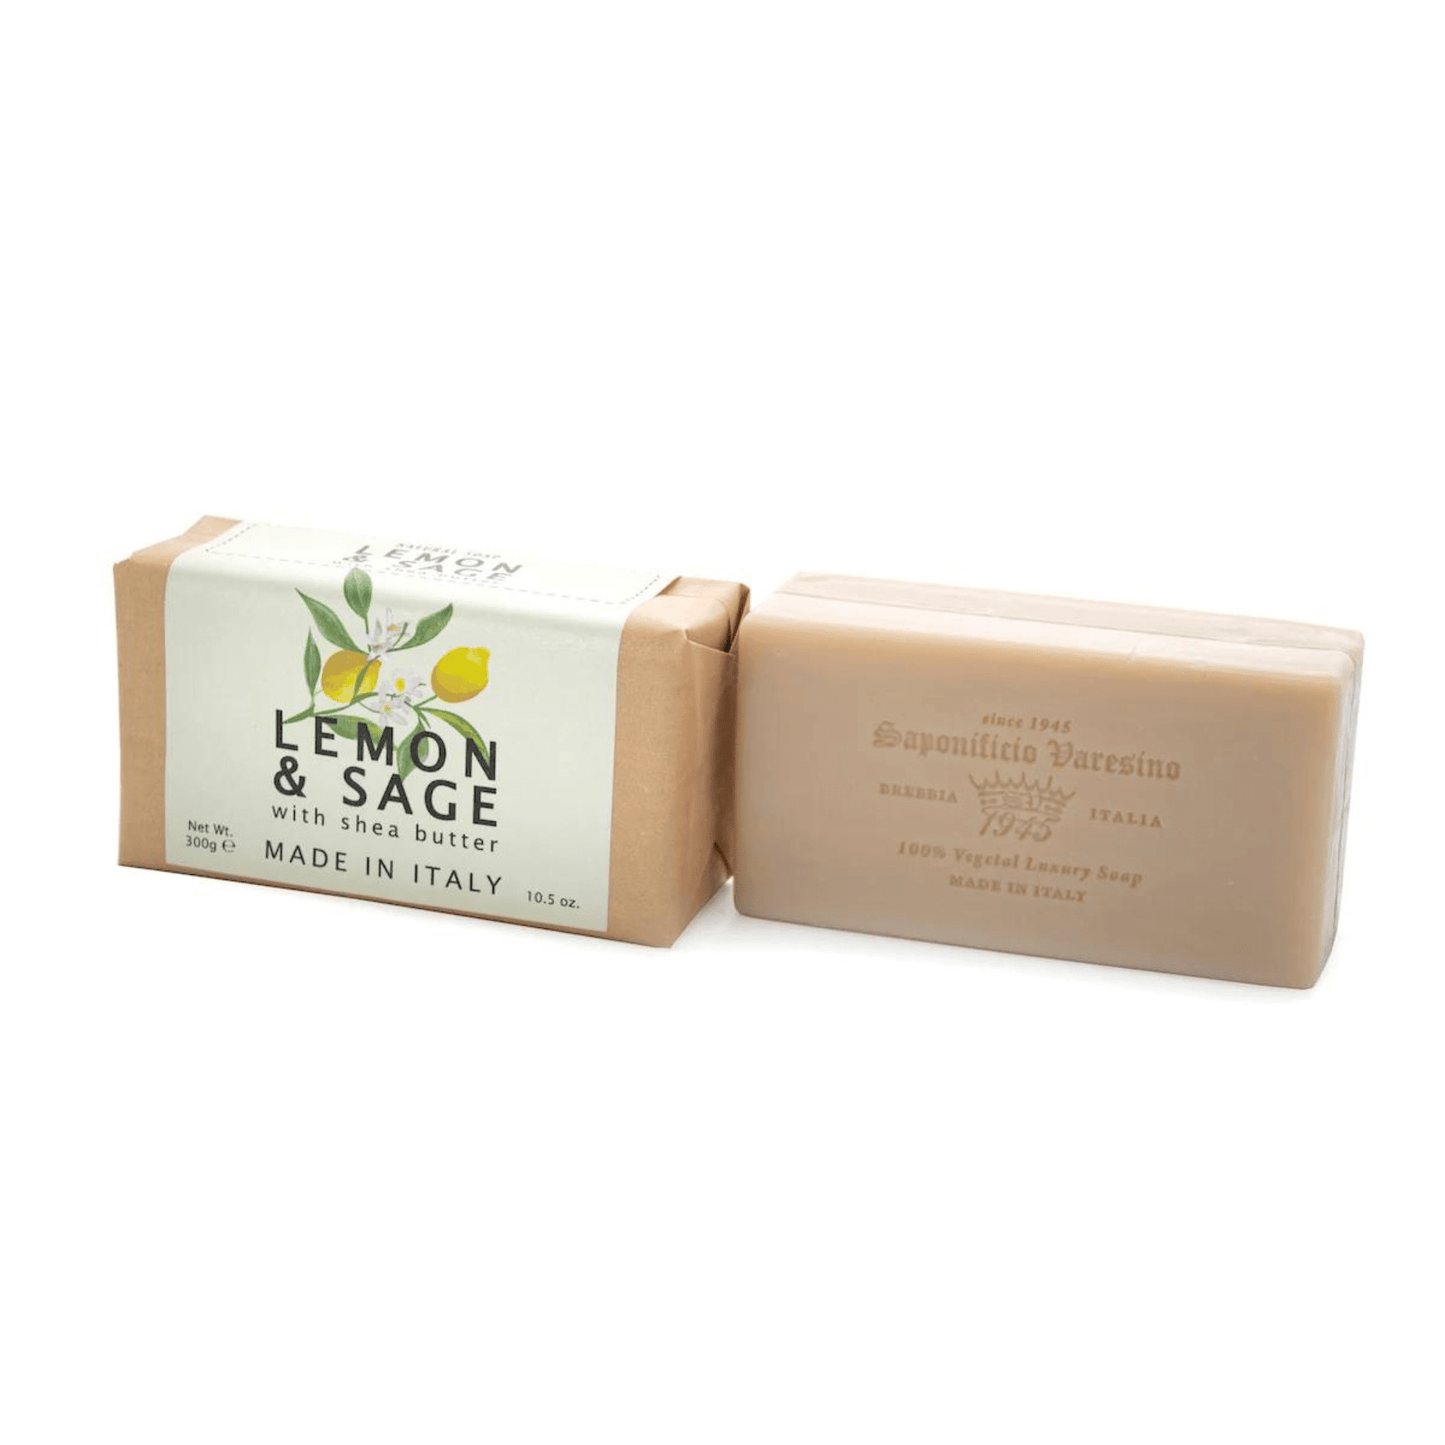 Primary Image of Lemon and Sage Soap with Shea Butter